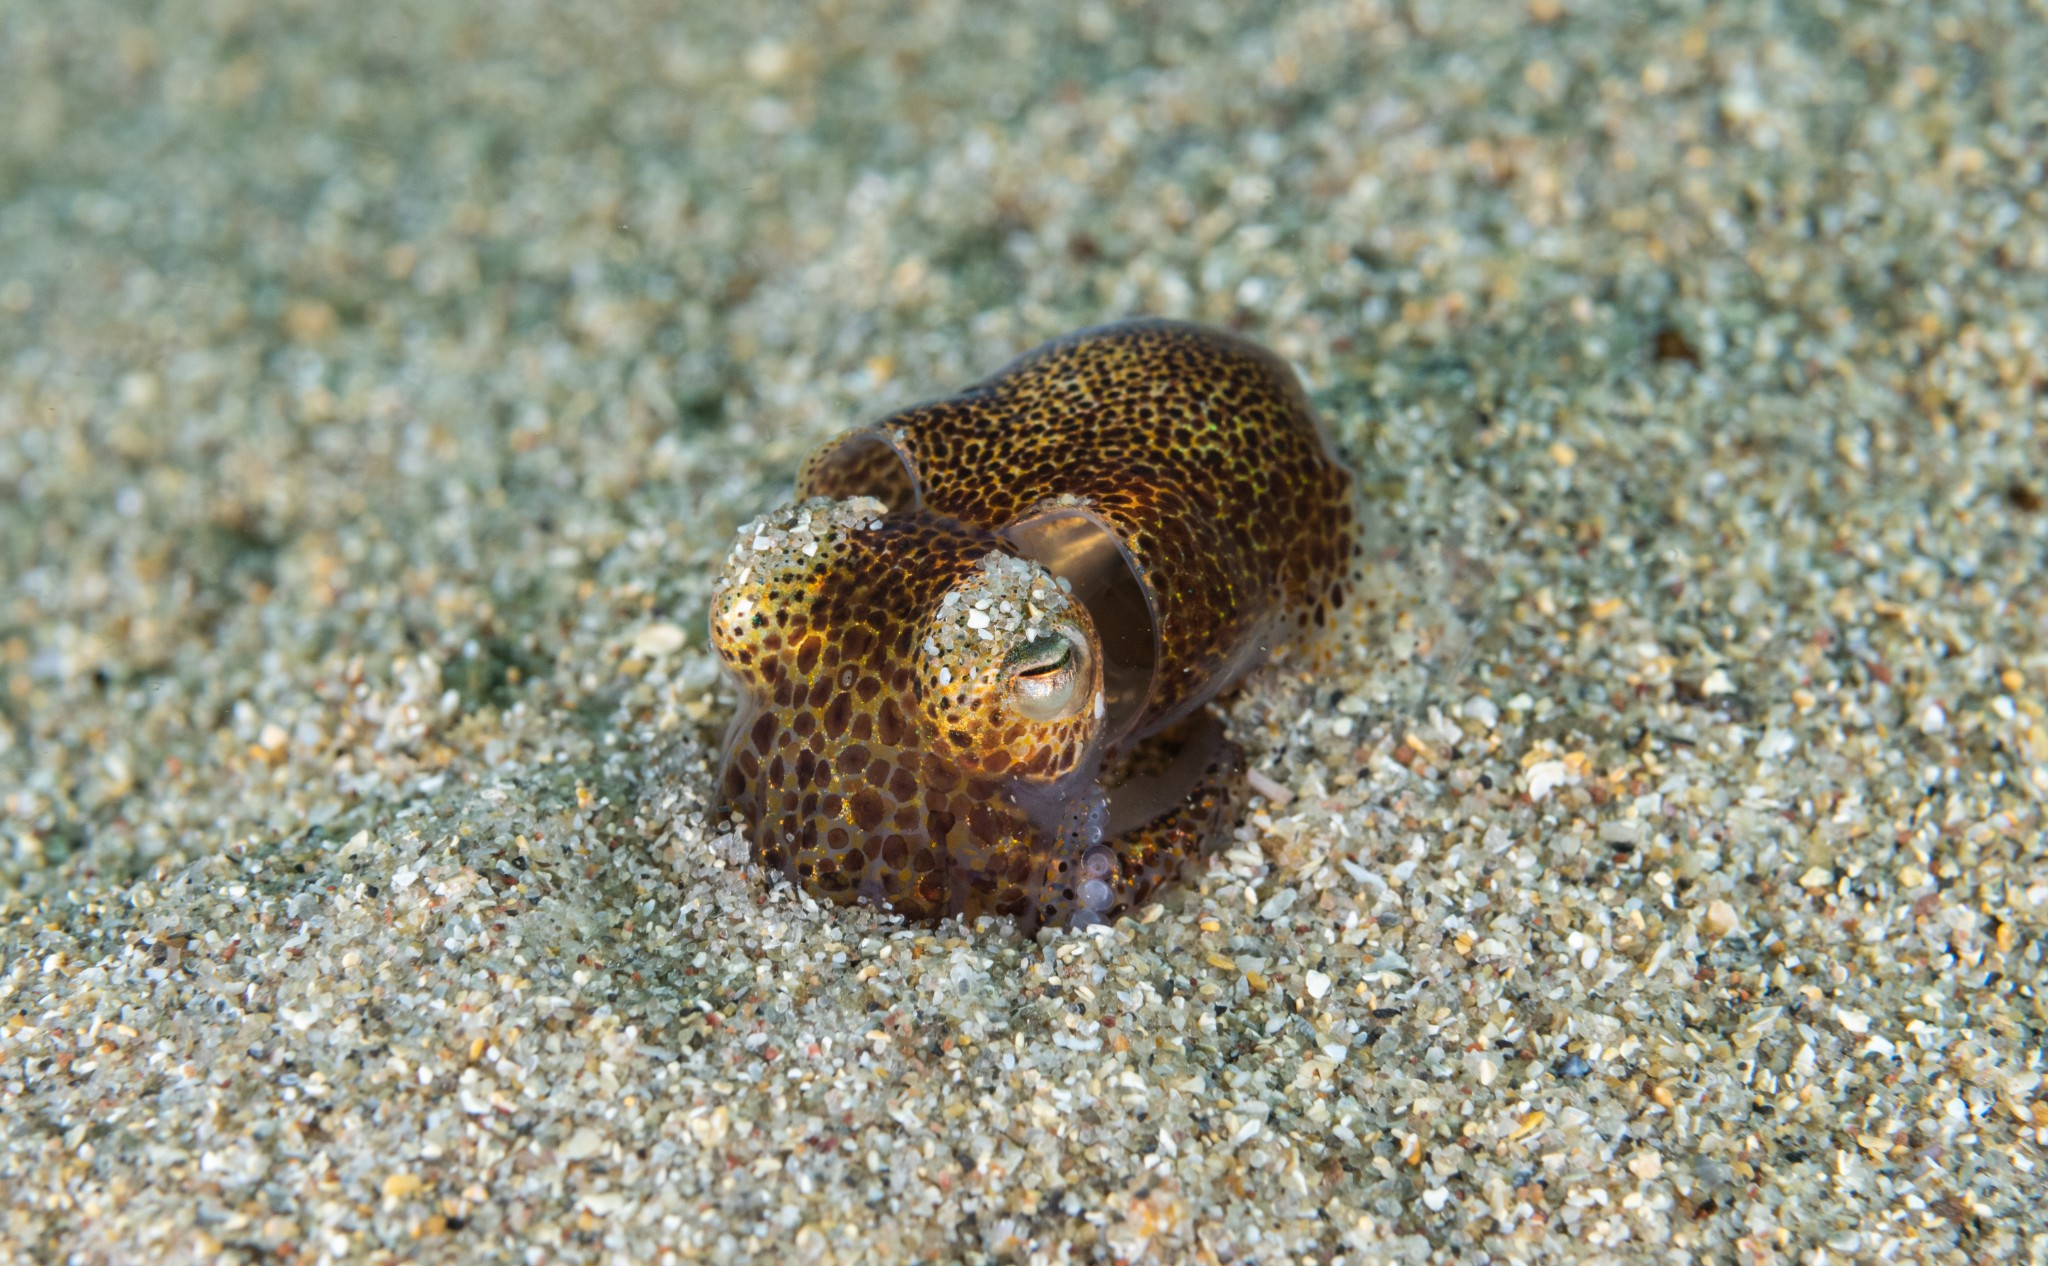 Baby cuttle in the sand - image by Raymond Besant